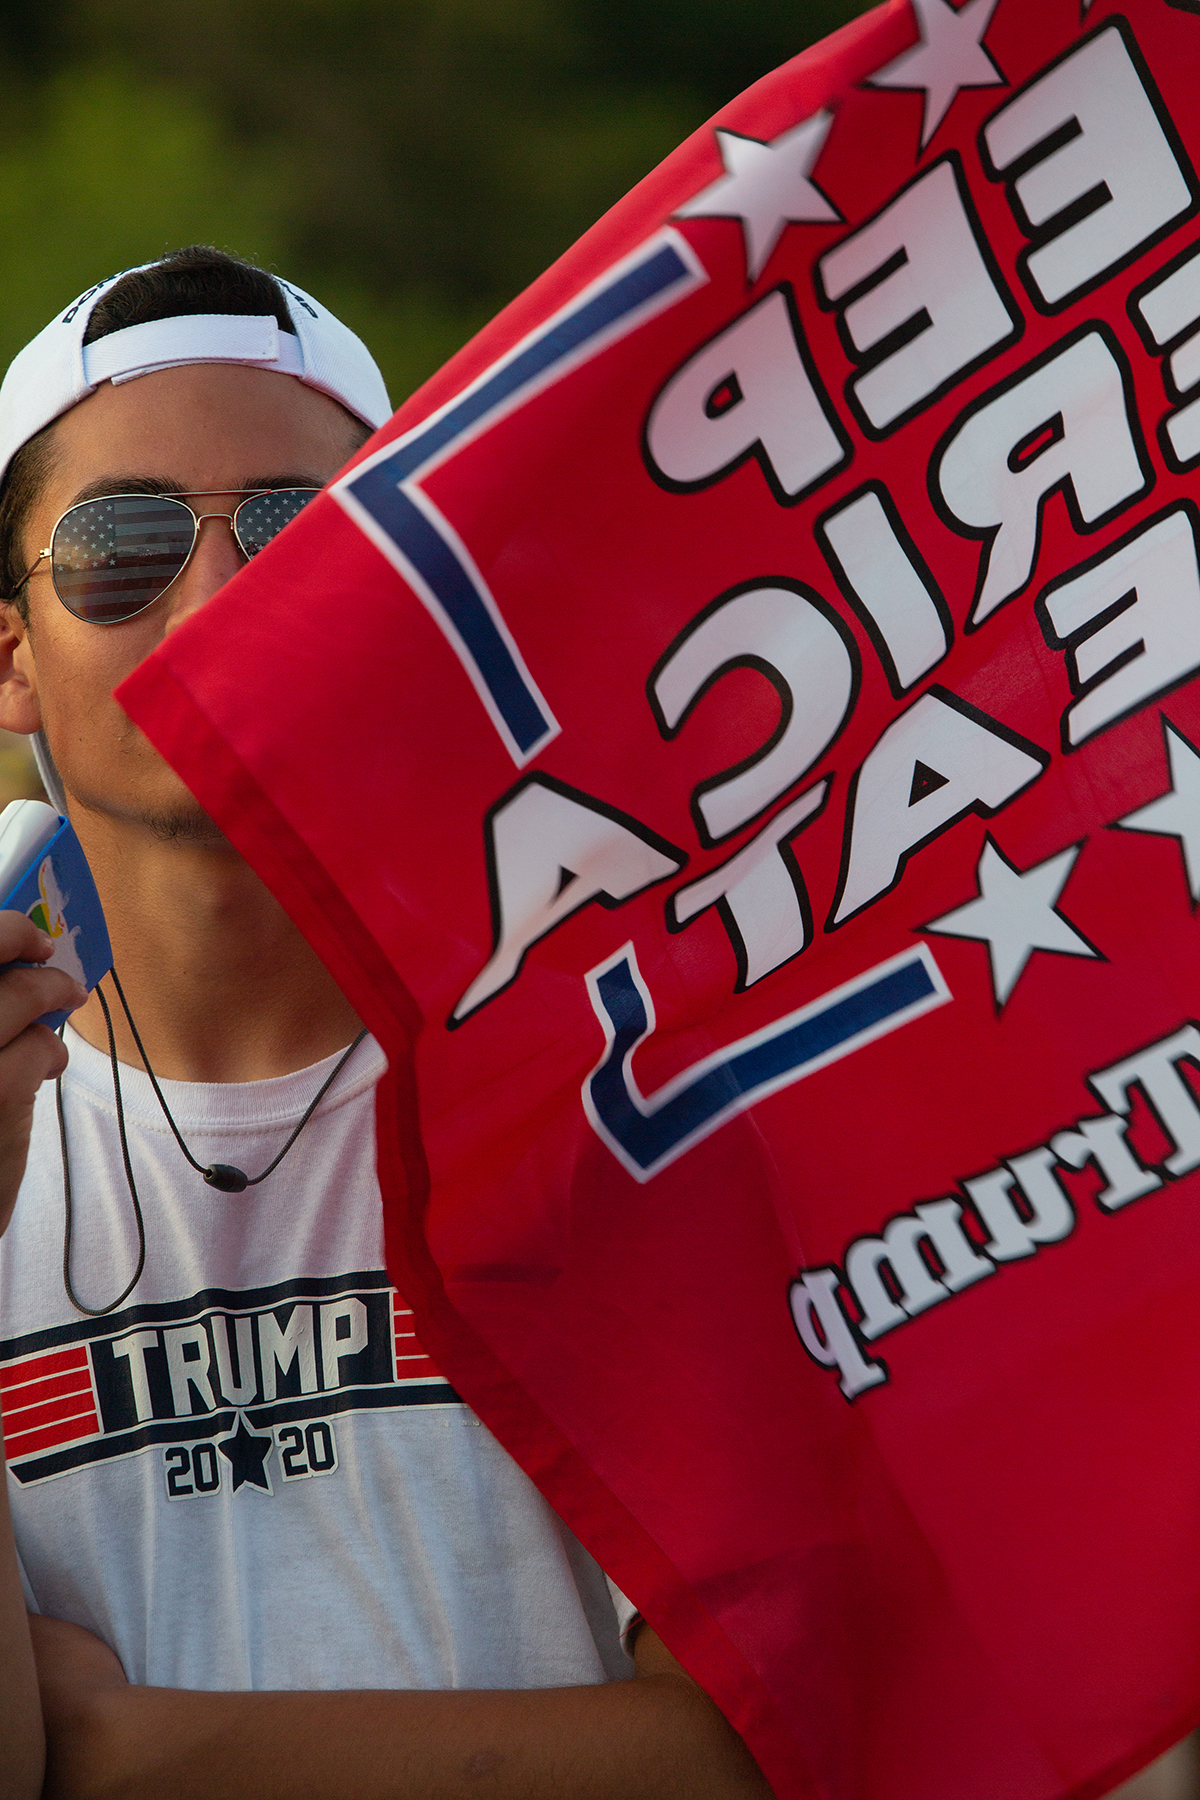  A man sells merchandise as Trump supporters congregate outside Williams Arena on East Carolina University's campus on July 17, 2019 in Greenville, NC. The "Send her back!" chant—referring to Rep. Ilhan Omar—debuted at this rally. (For The Atlantic) 